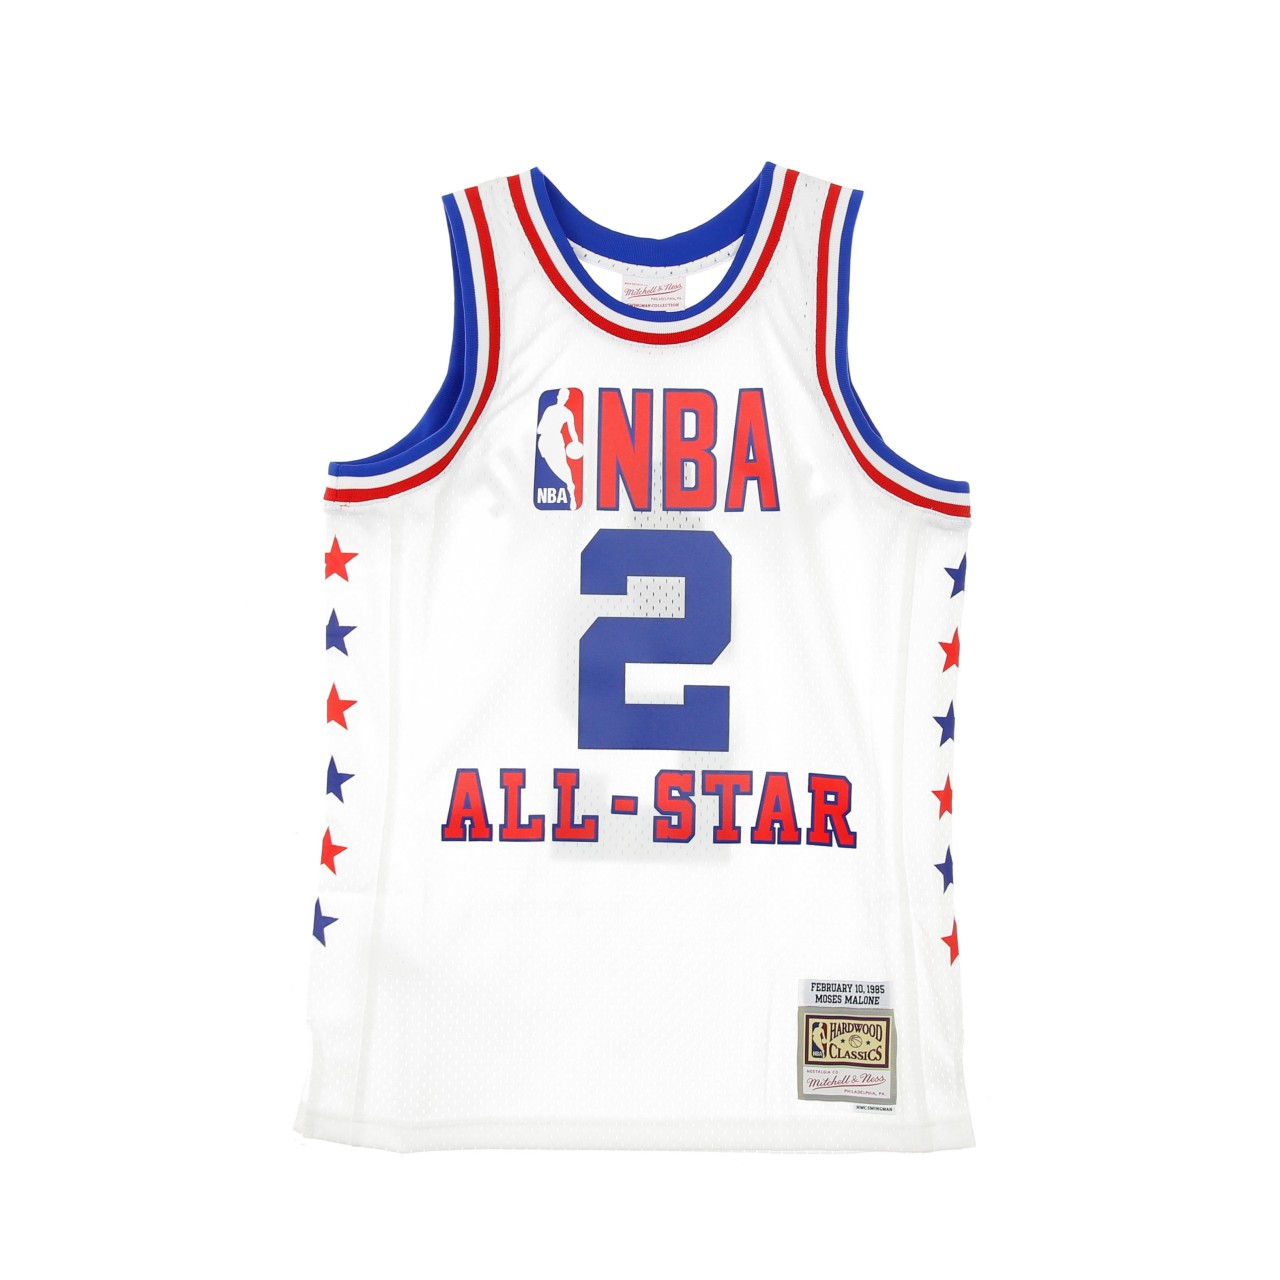 MITCHELL & NESS NBA SWINGMAN JERSEY HARDWOOD CLASSICS NO.2 MOSES MALONE ALL STAR GAME EAST 1985 SMJYLG20014-ASEWHIT85MML